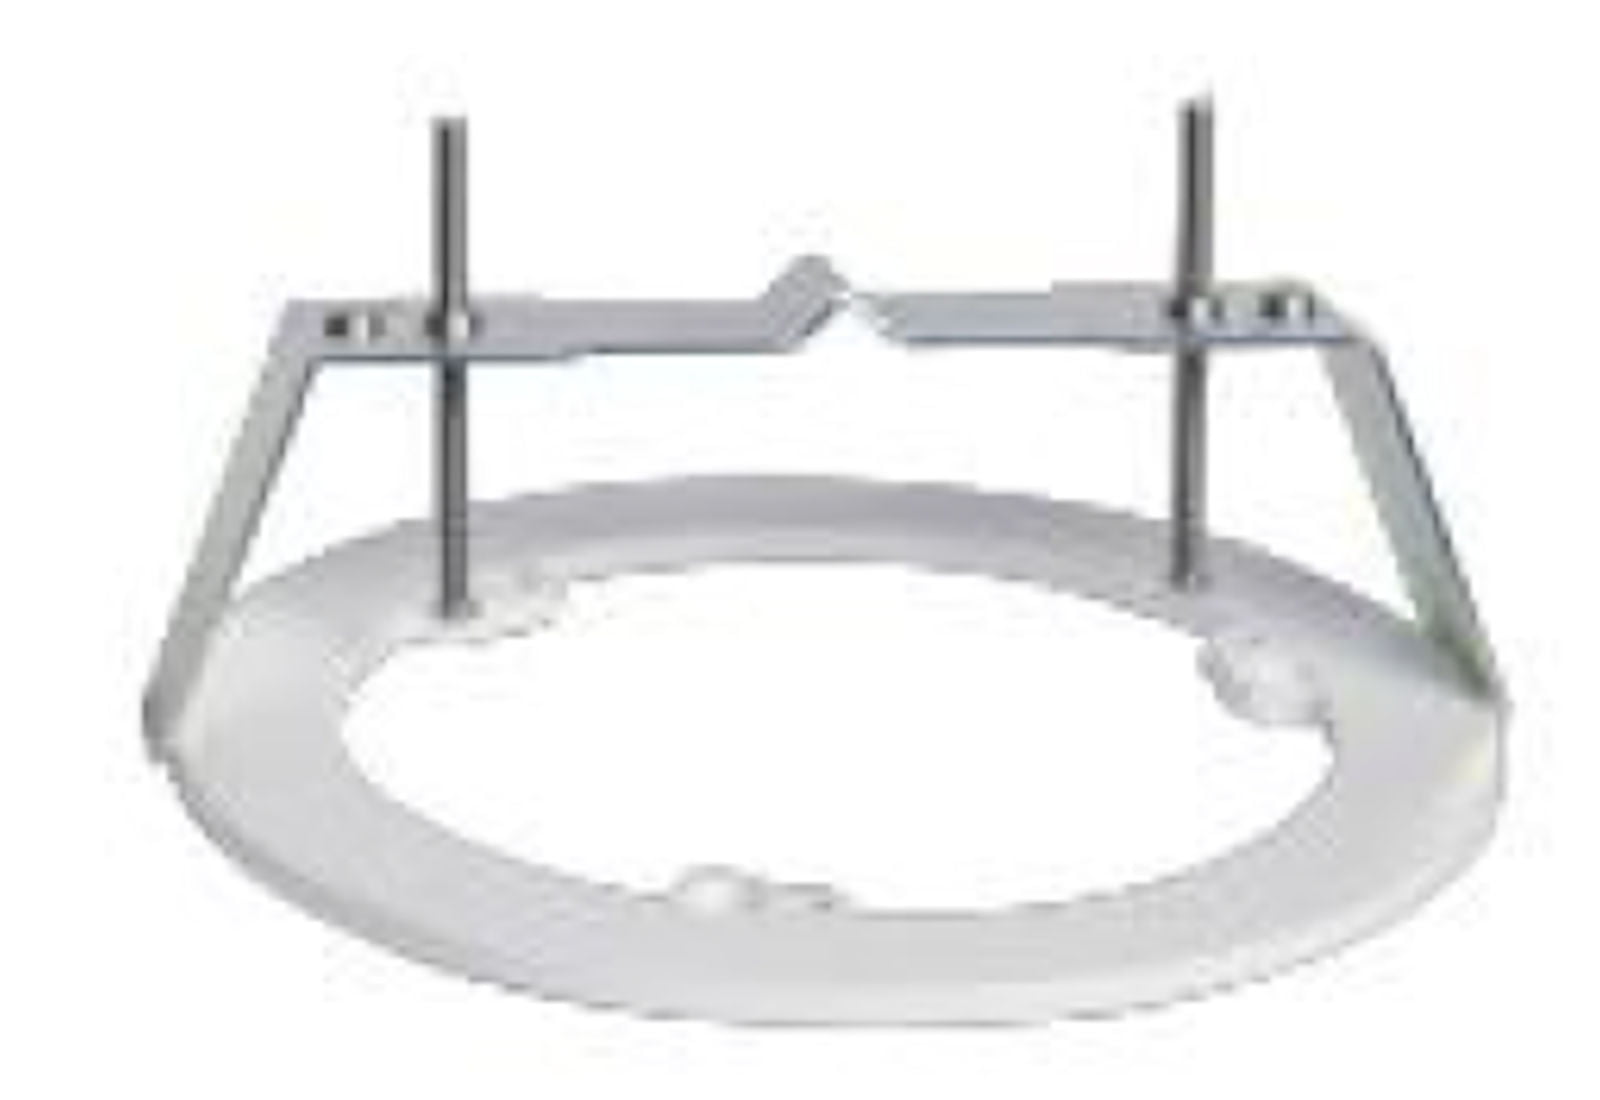 V2000D-ICH In-Ceiling Mounting Kits for the V2000D Dome Cameras